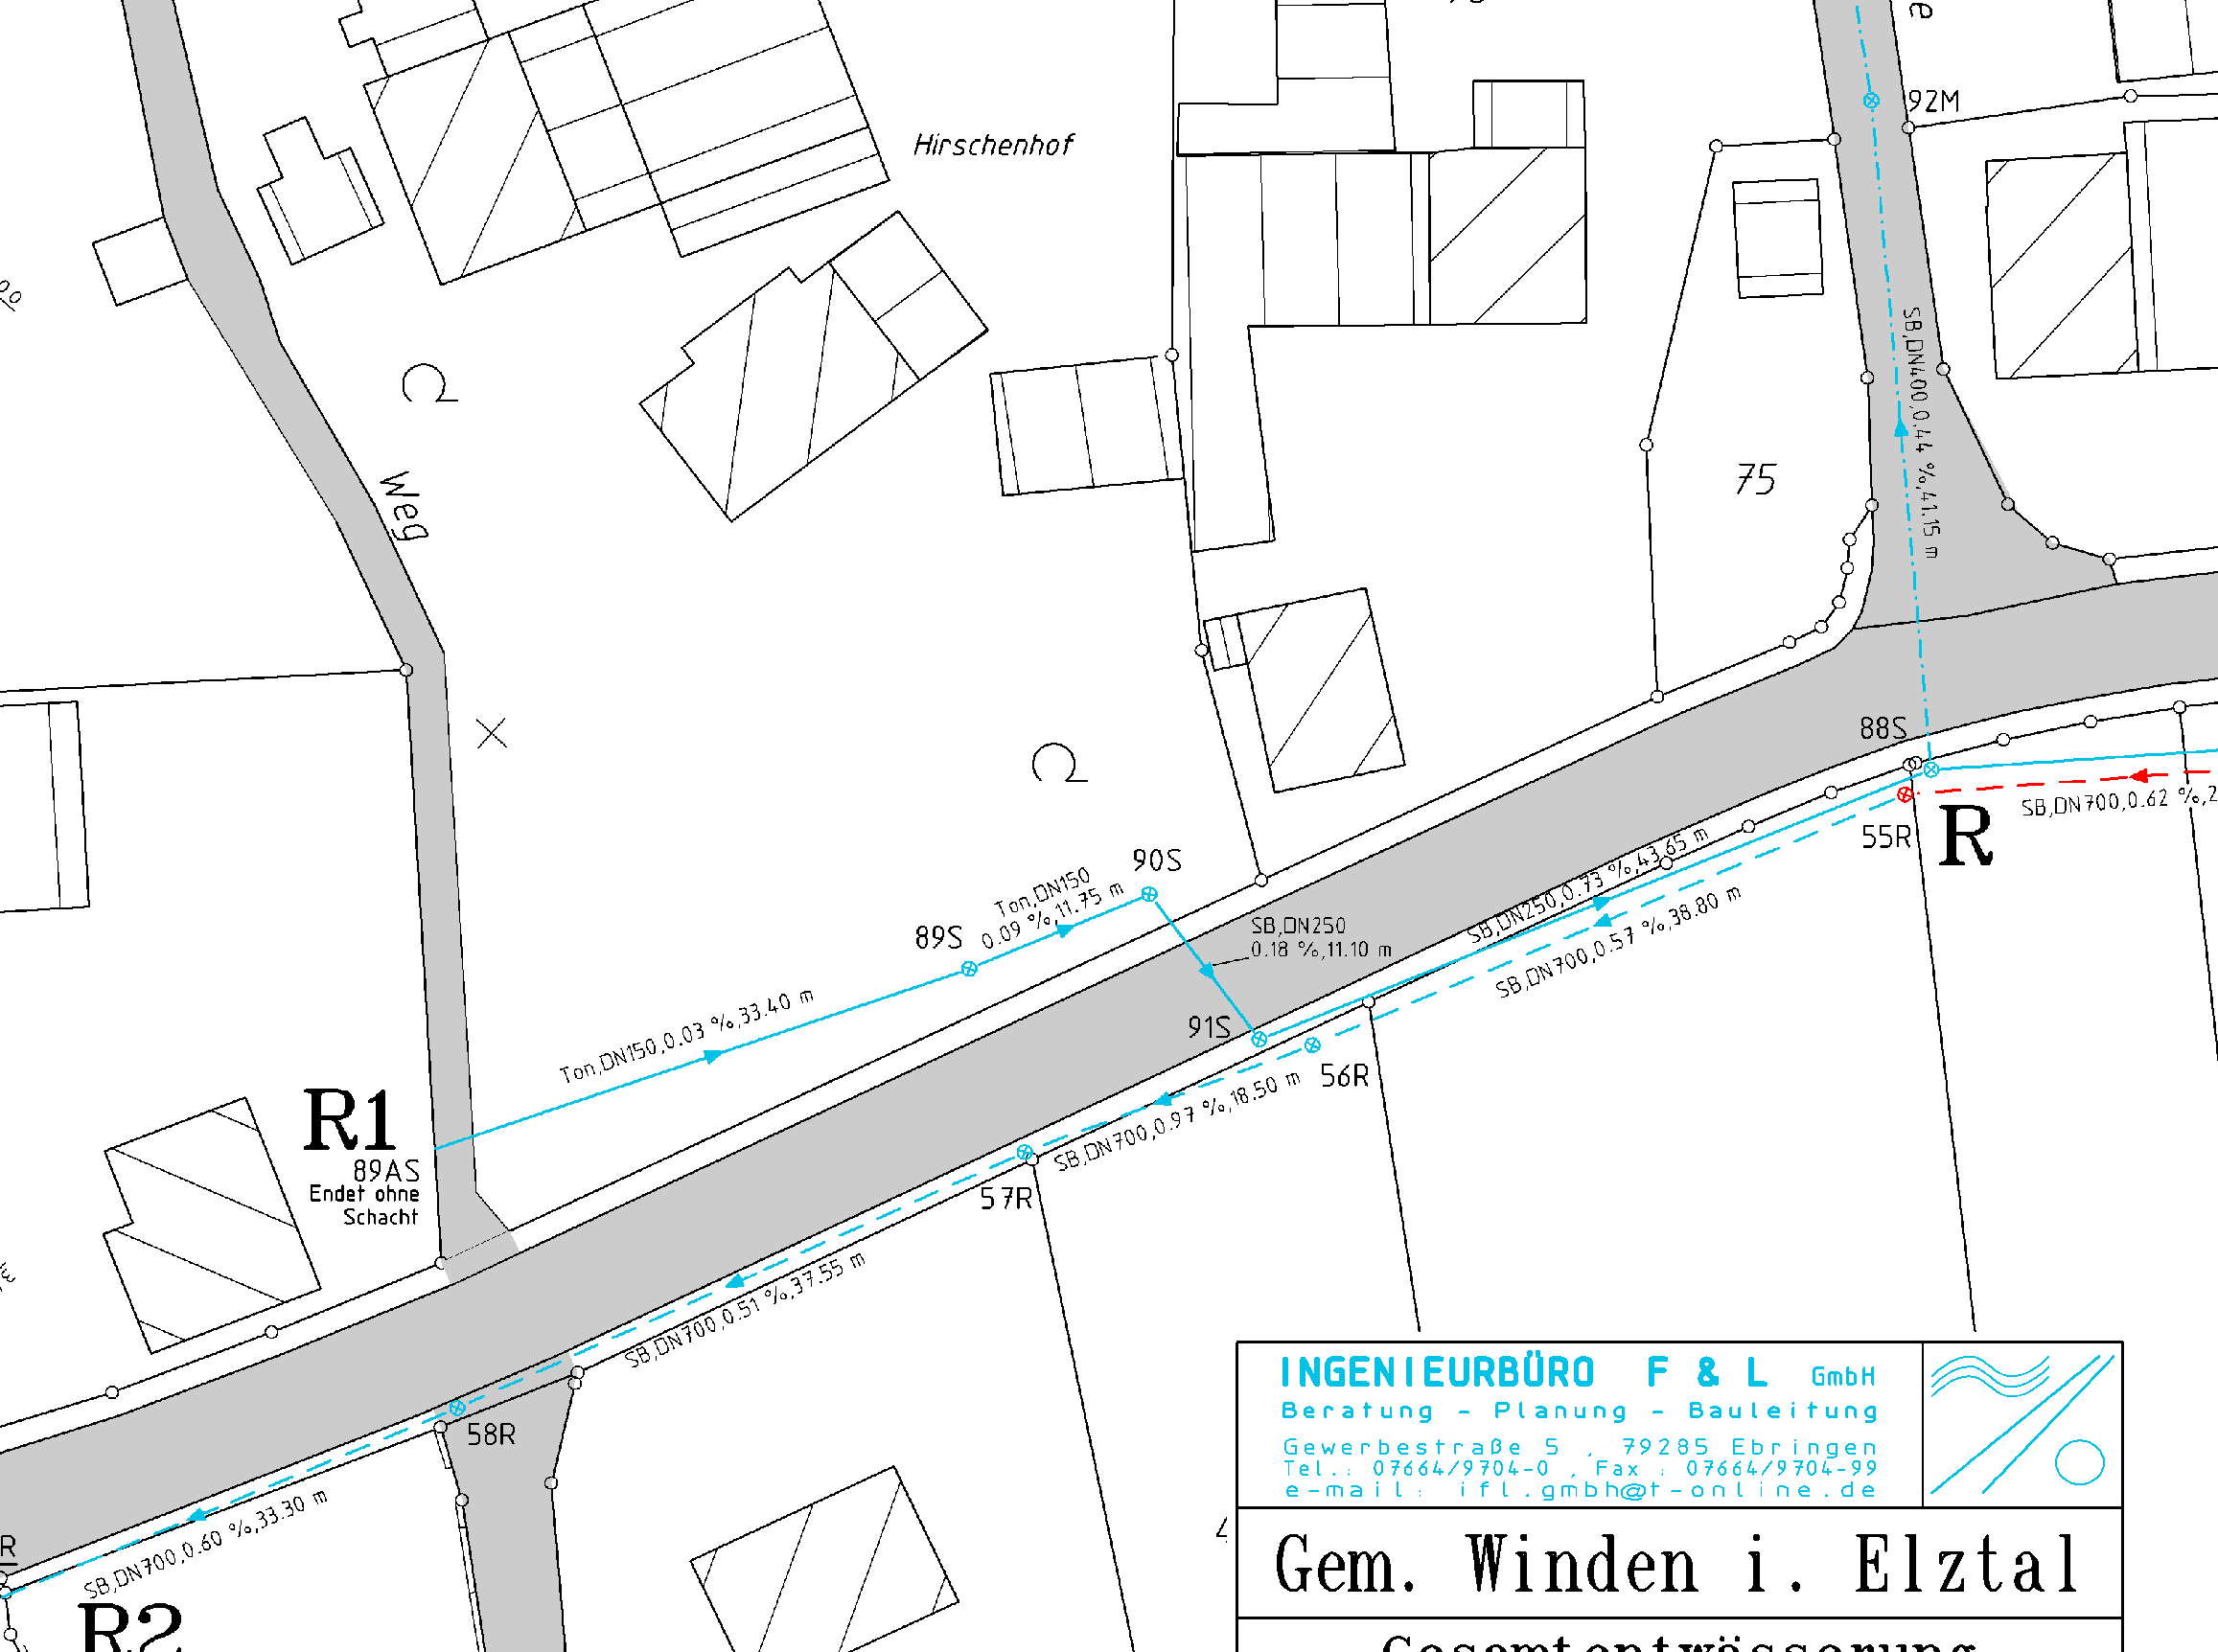 Sewer base map for the municipality of Winden, excerpt.